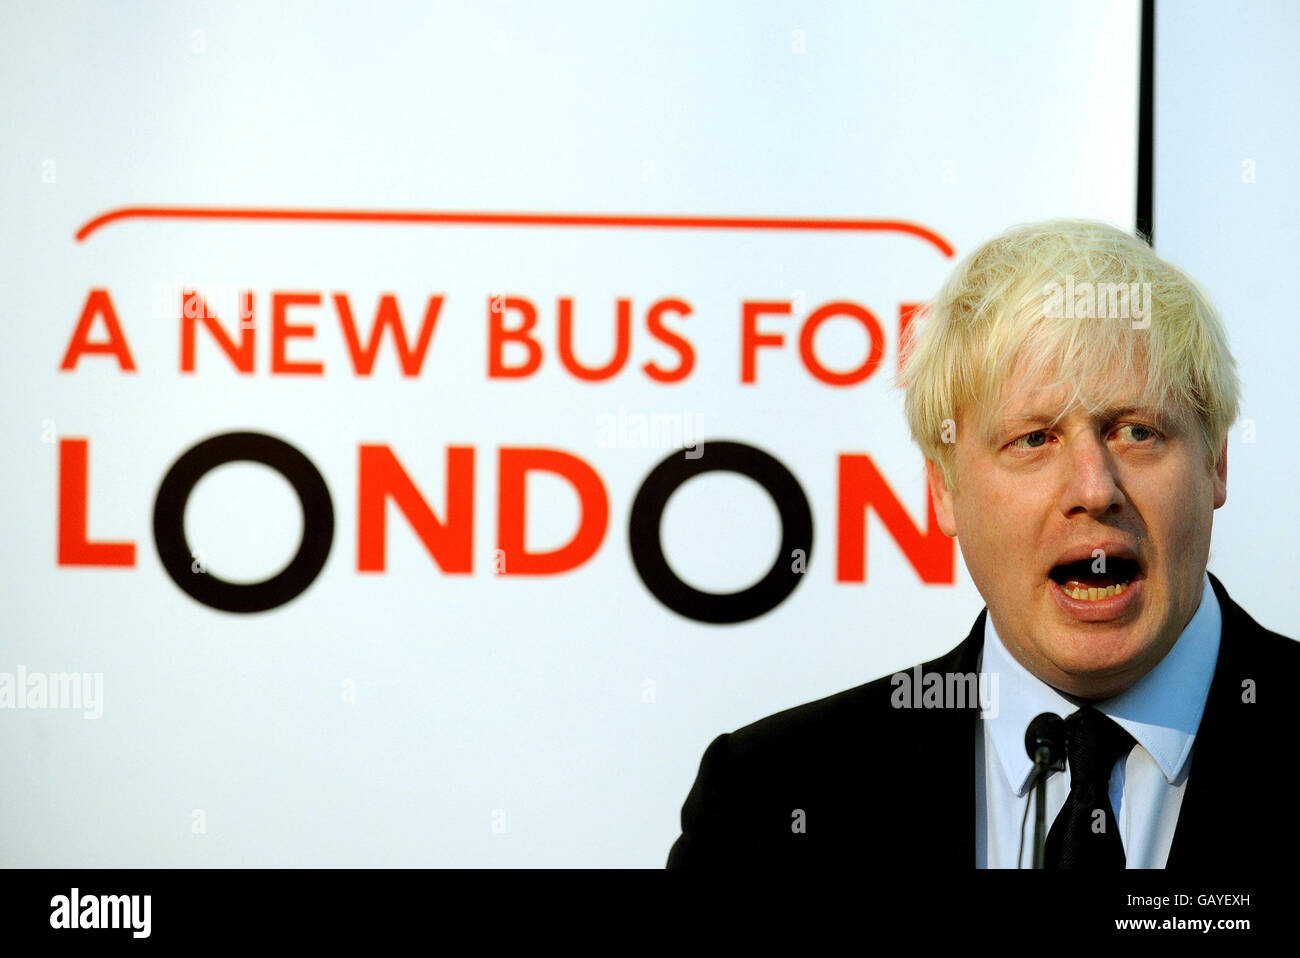 Boris launches competition for new London bus Stock Photo